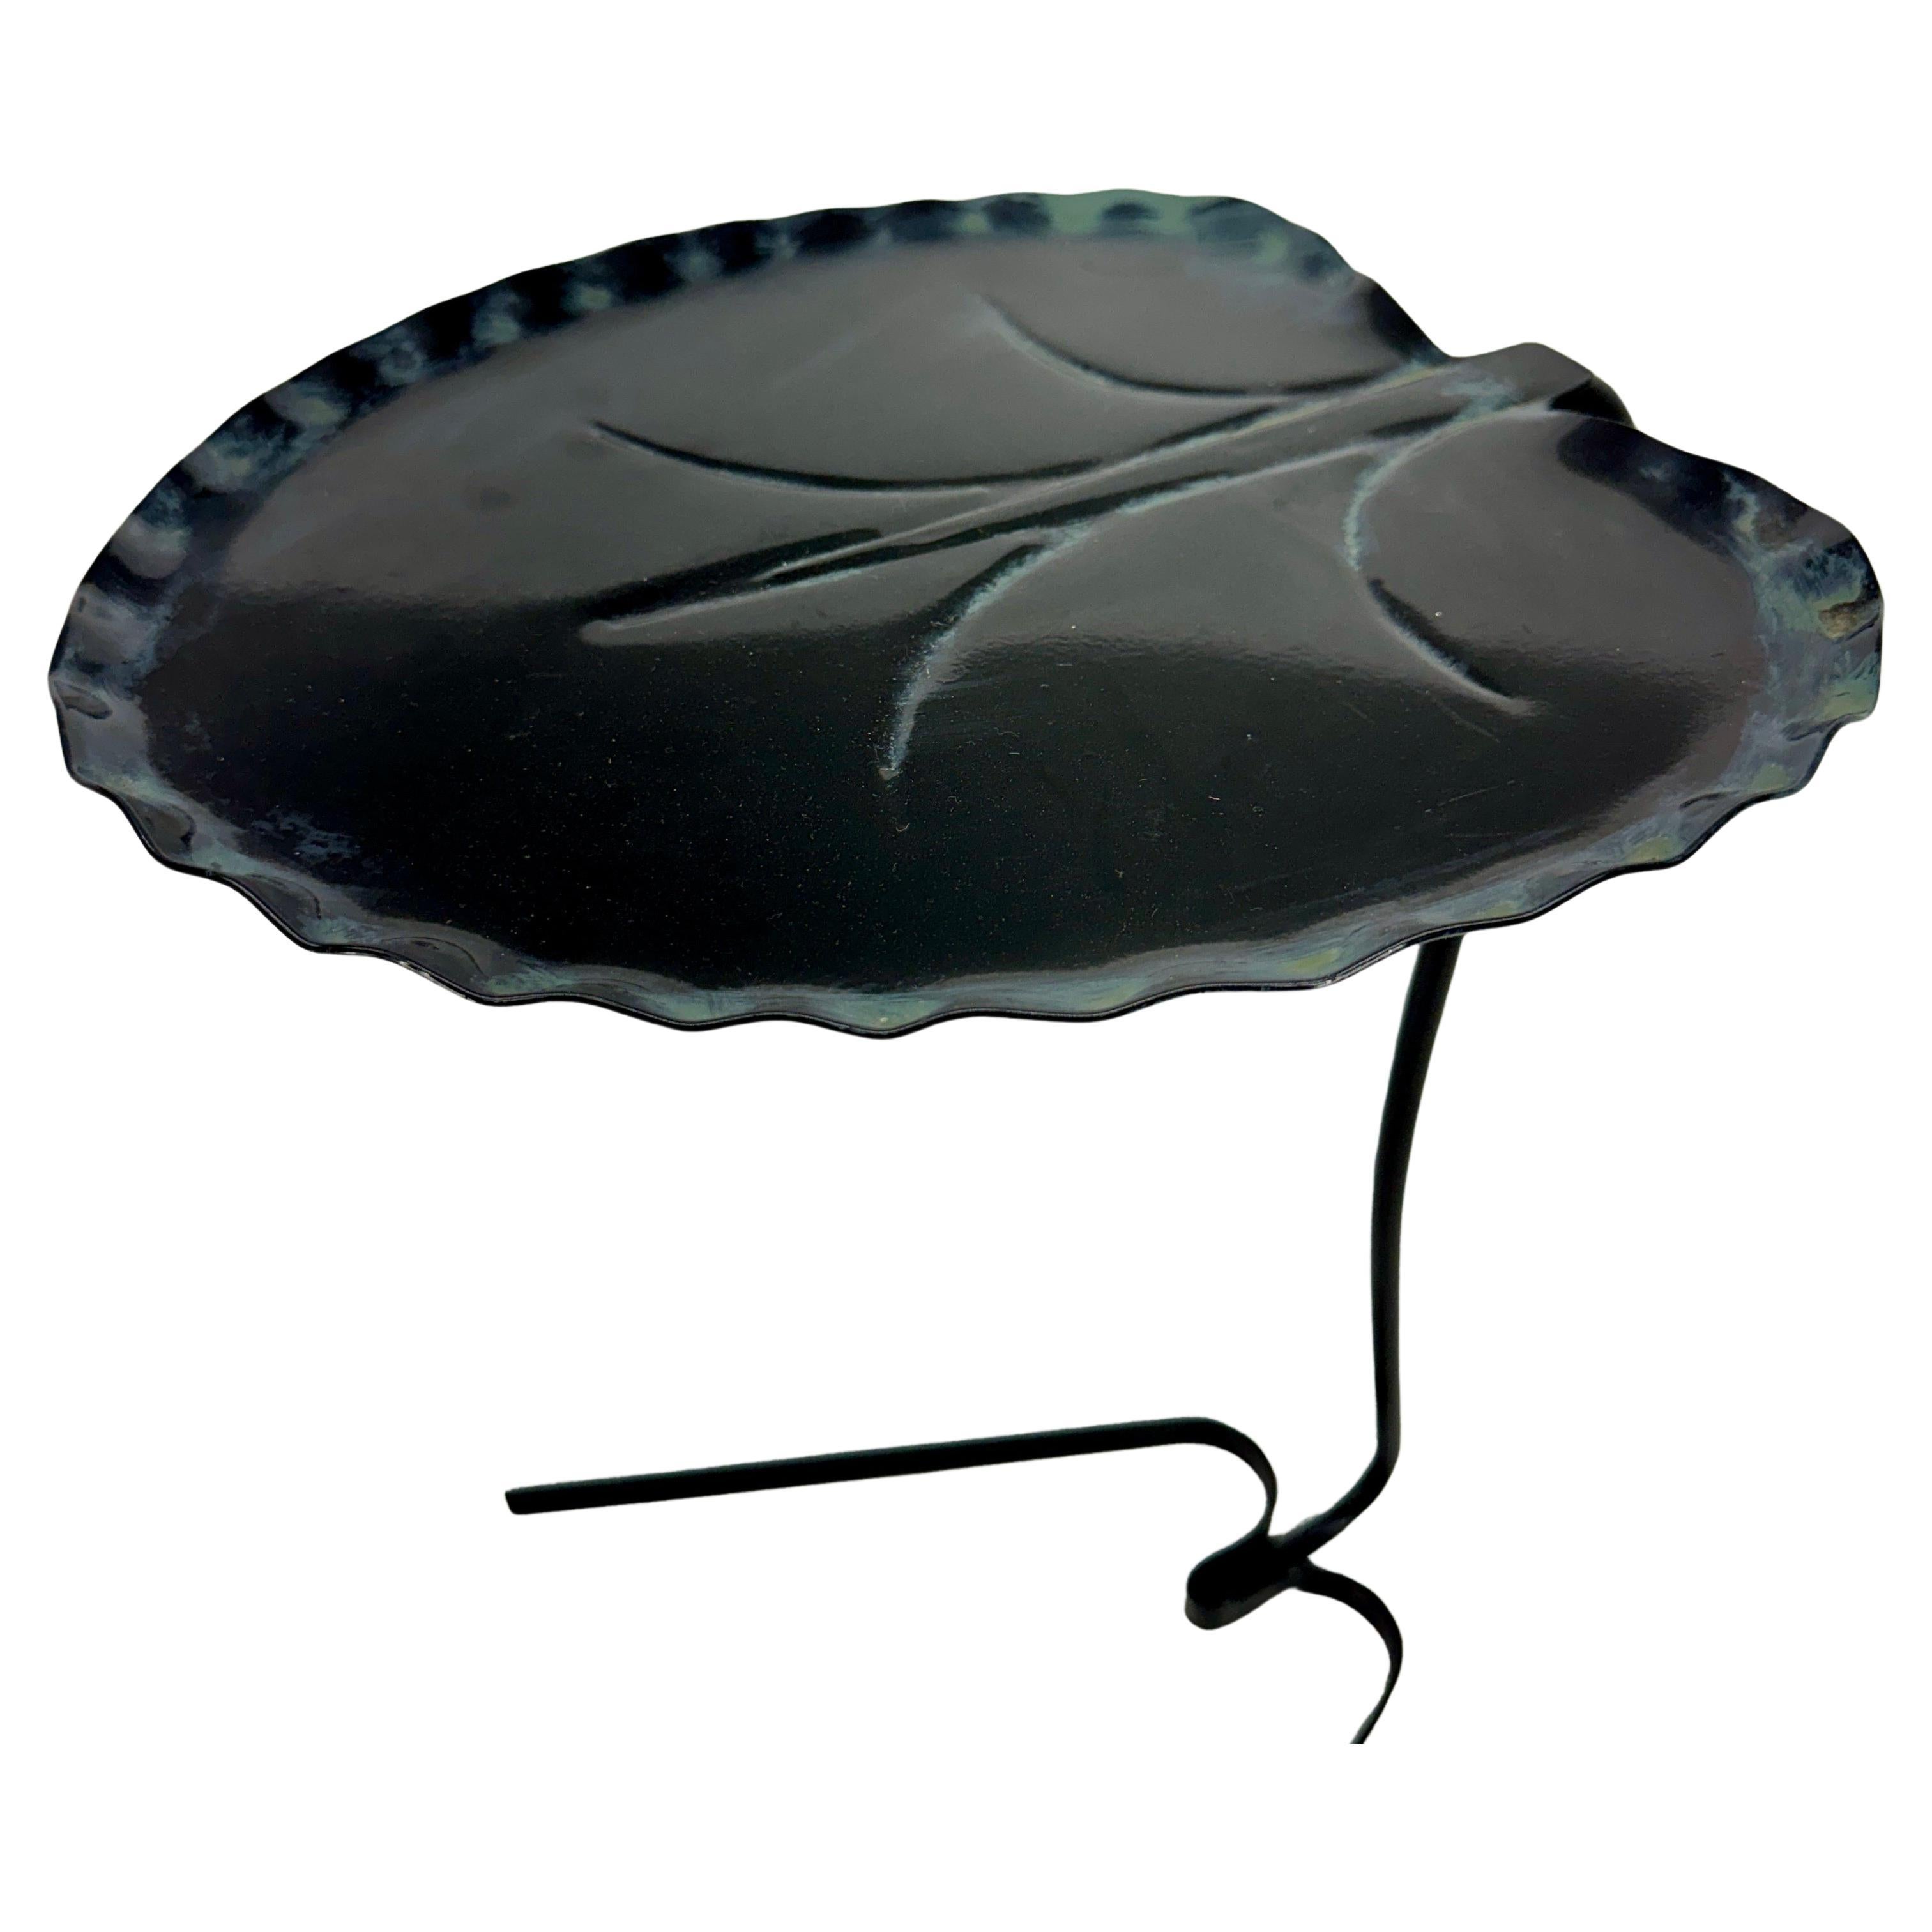 Salterini Lotus Leaf Table Garden Table, 1950's Italy

Salterini Leaf Table with original green patin. This classic wrought iron leaf table is in wonderful condition and certainly makes a statement anywhere placed indoor next to a favotite chair or